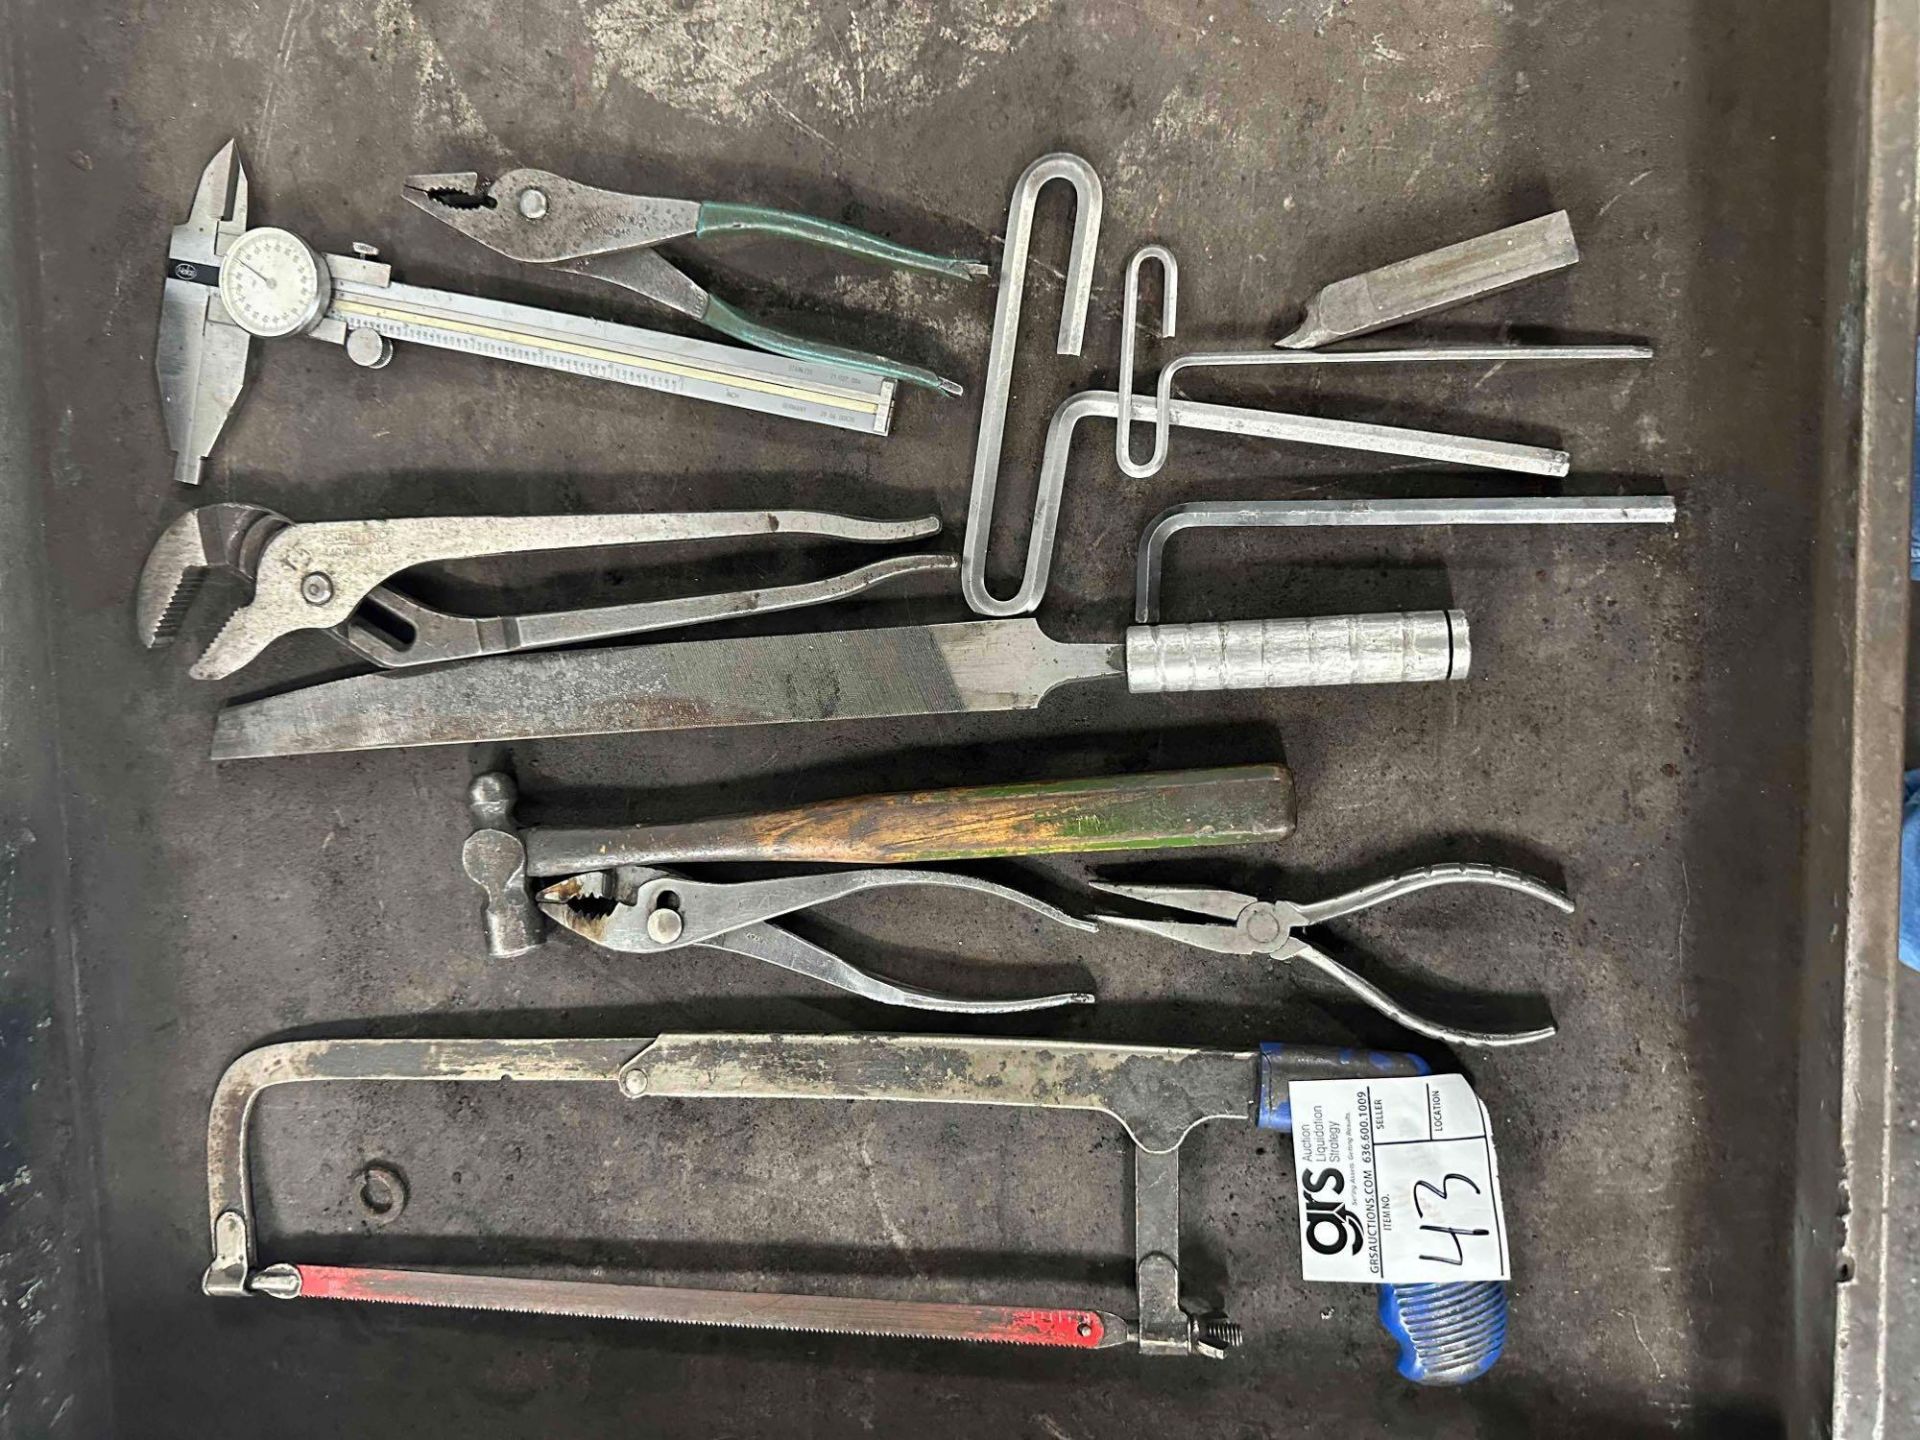 Hand Saw, File, Crescent Wrench, Pliers, Ball Pin Hammer Assorted